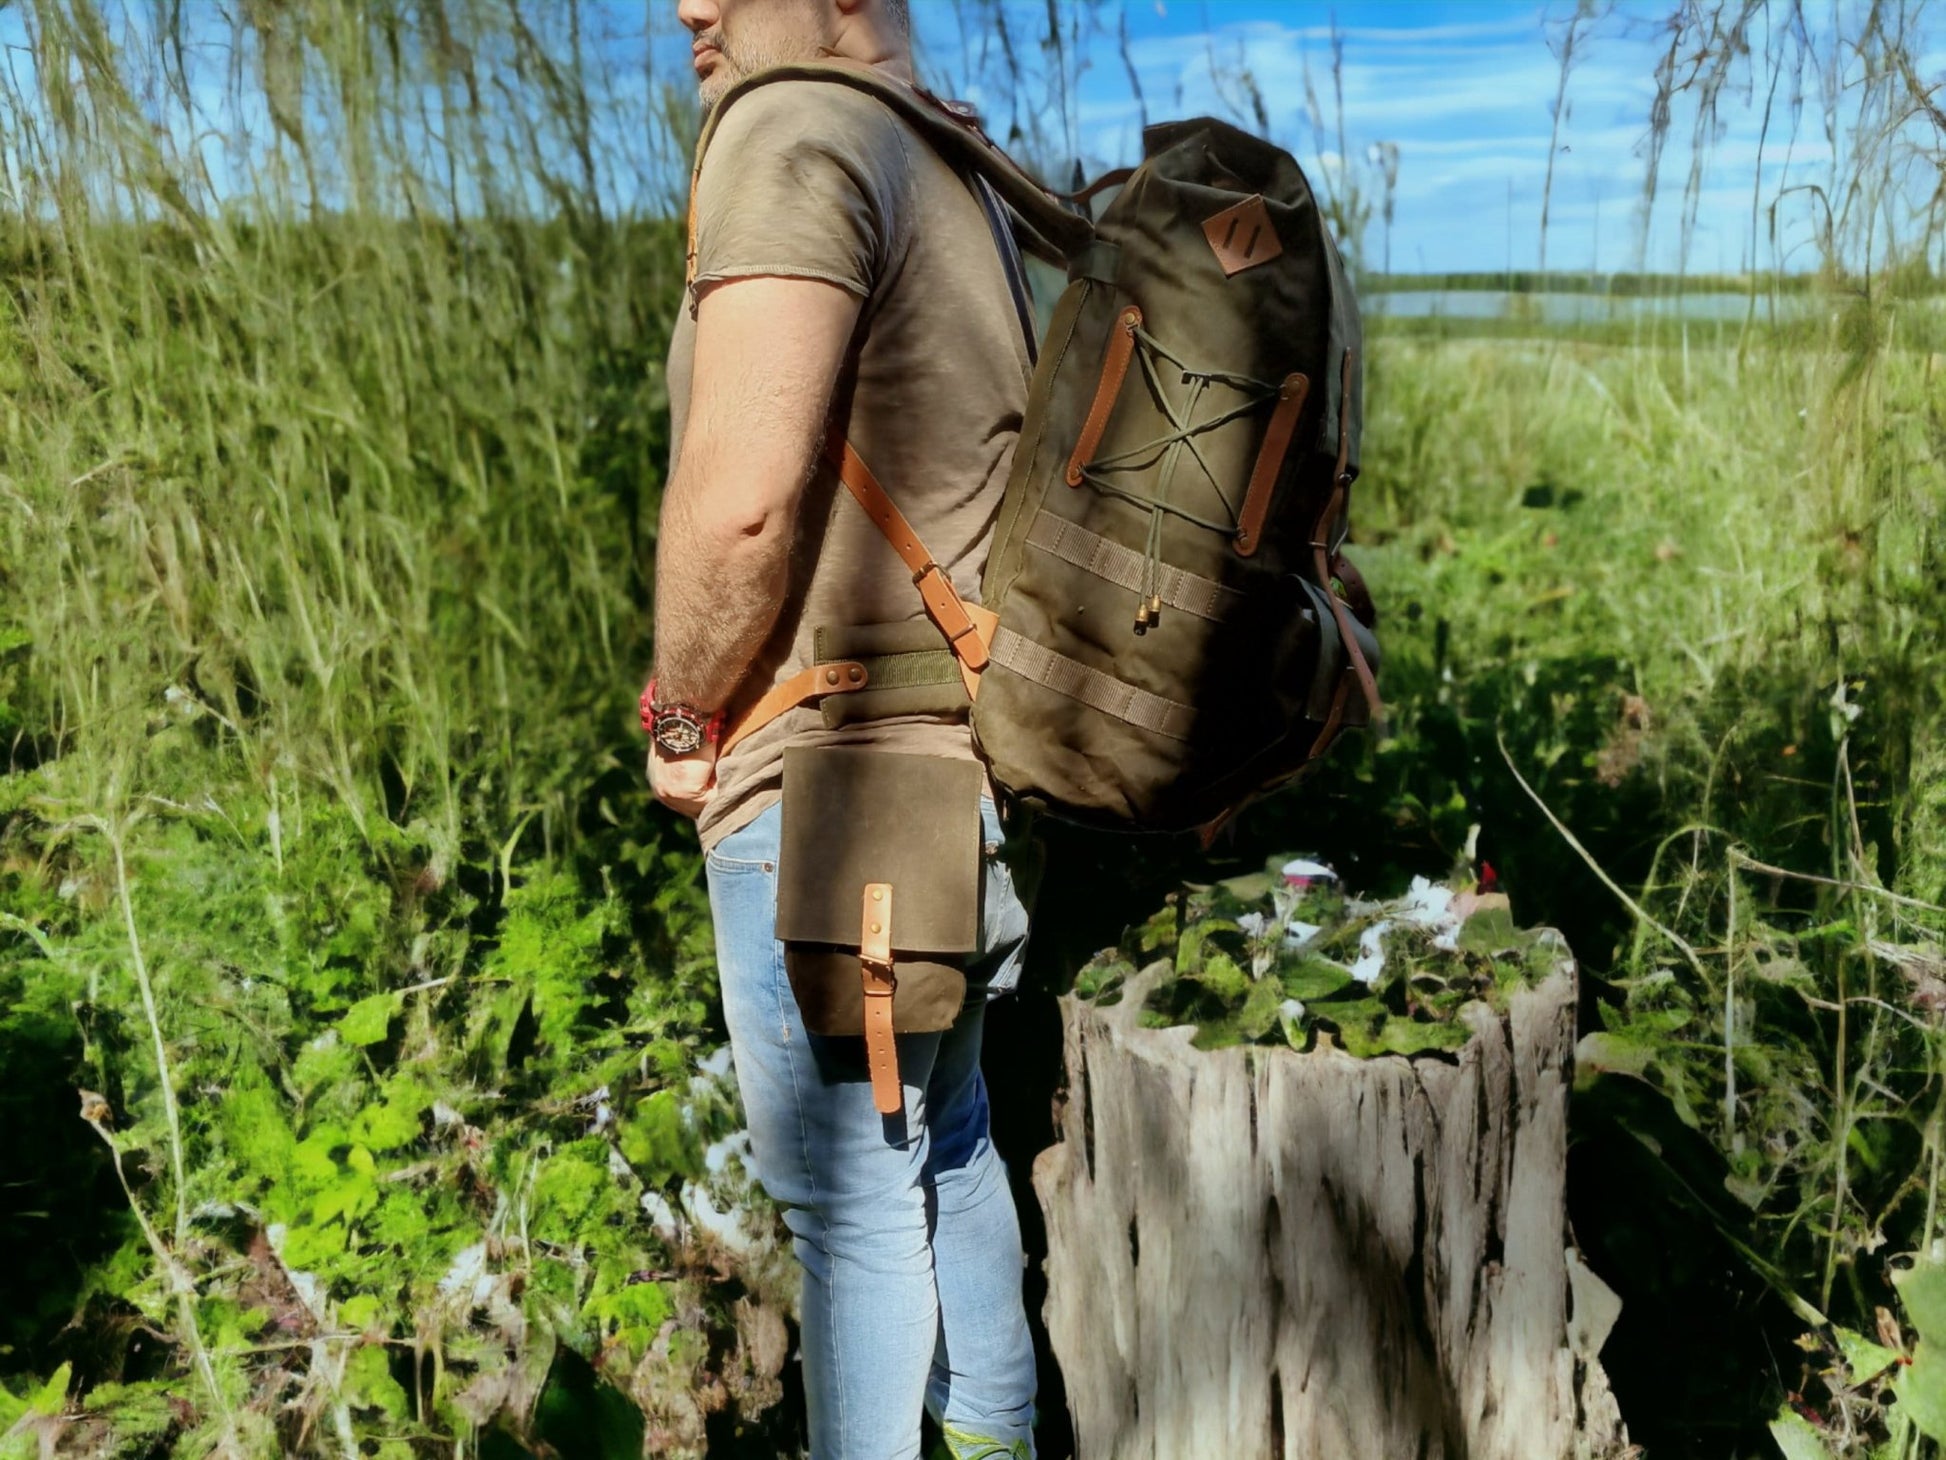 50L | Camping Backpack | Bushcraft Backpack | Brown - Green | Handmade  Leather-Canvas | Rucksack | Camping, Bushcraft | Personalization